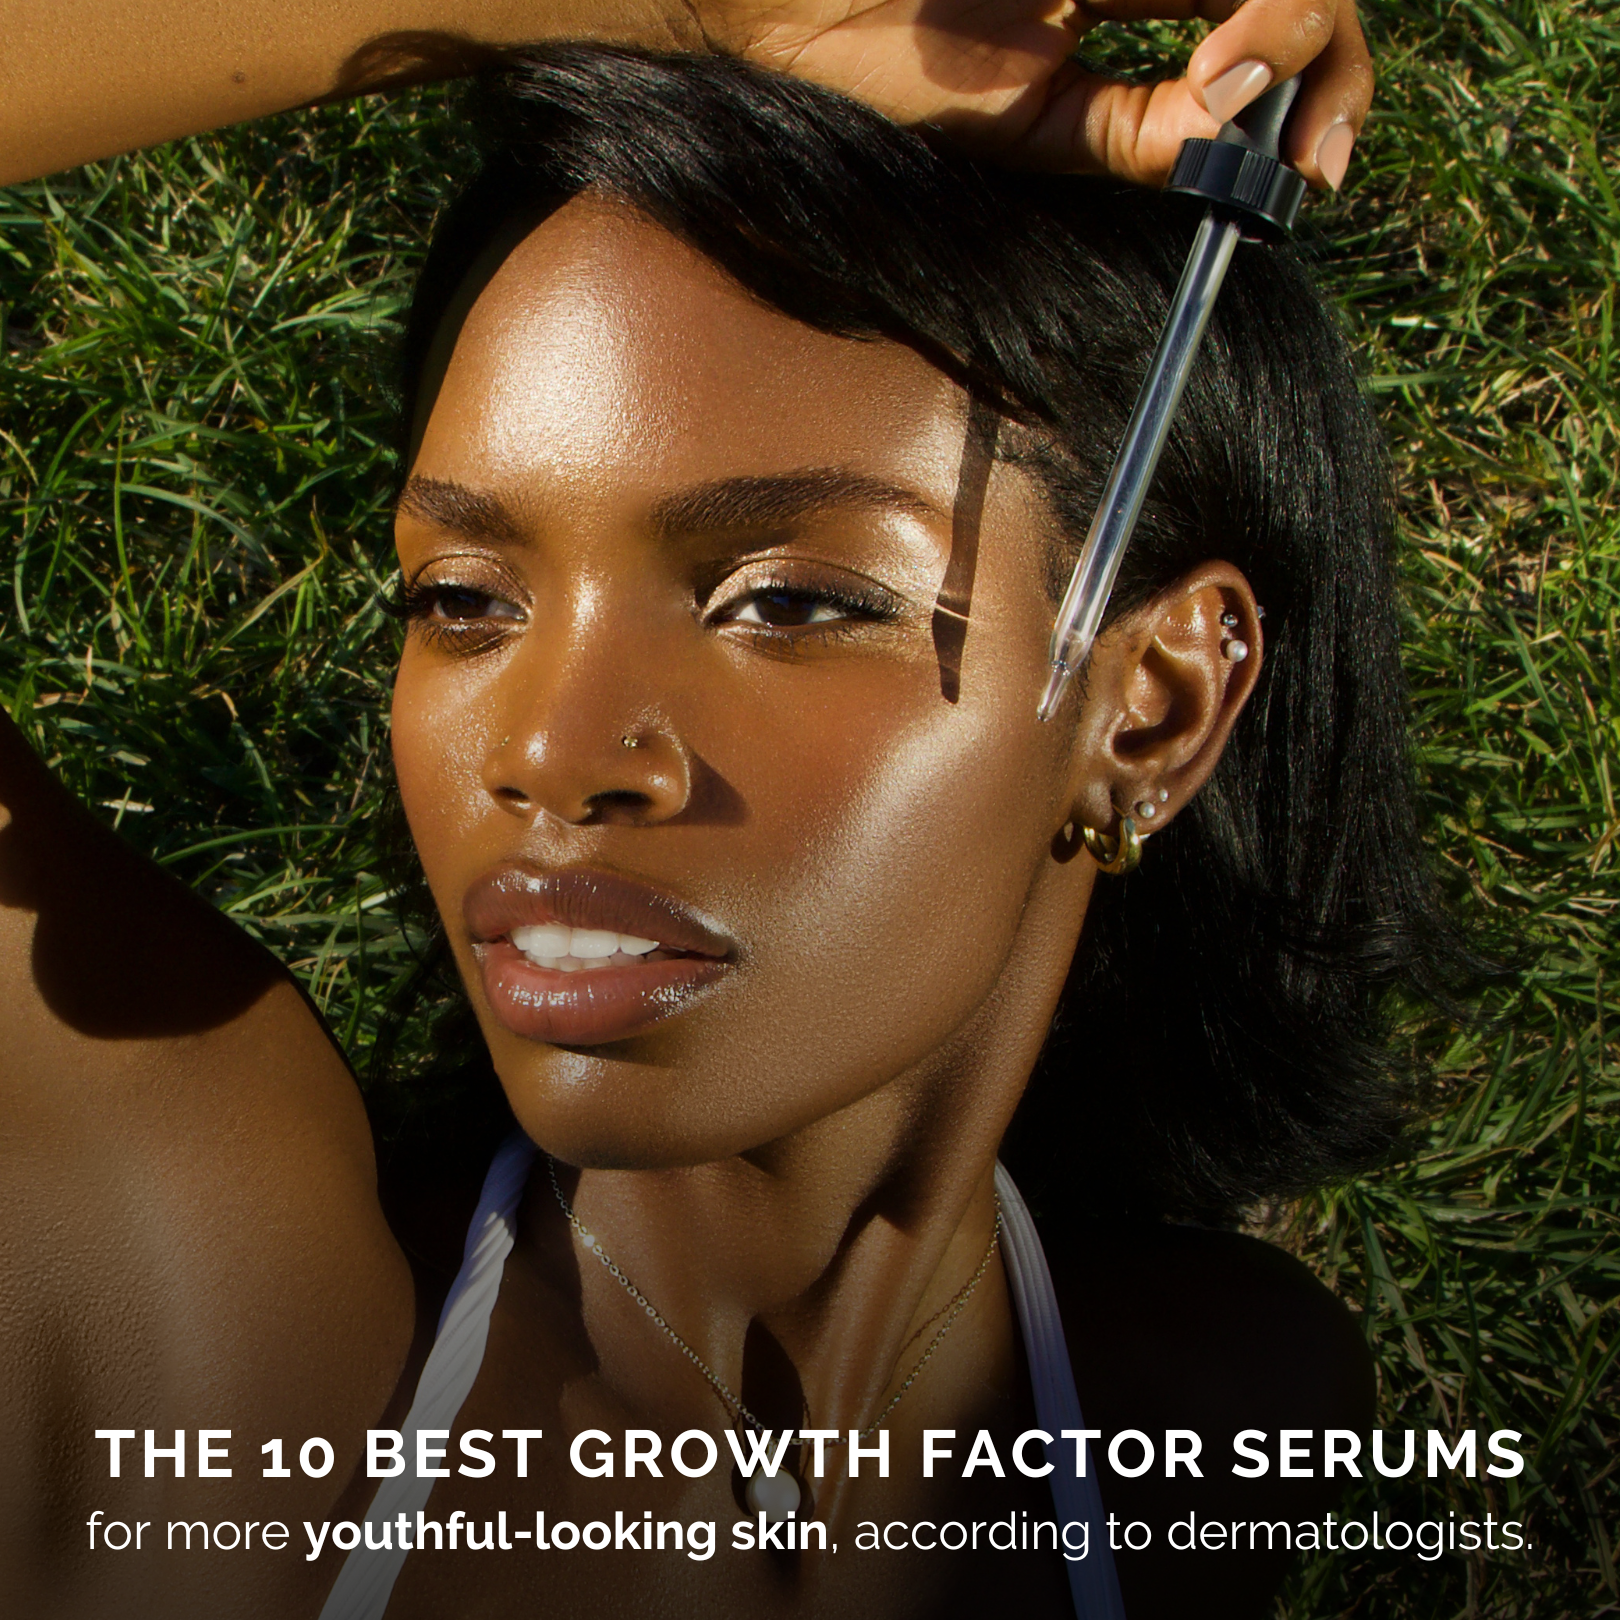 Voted The 10 Best Growth Factor Serums for More Youthful-Looking Skin, According to Dermatologists